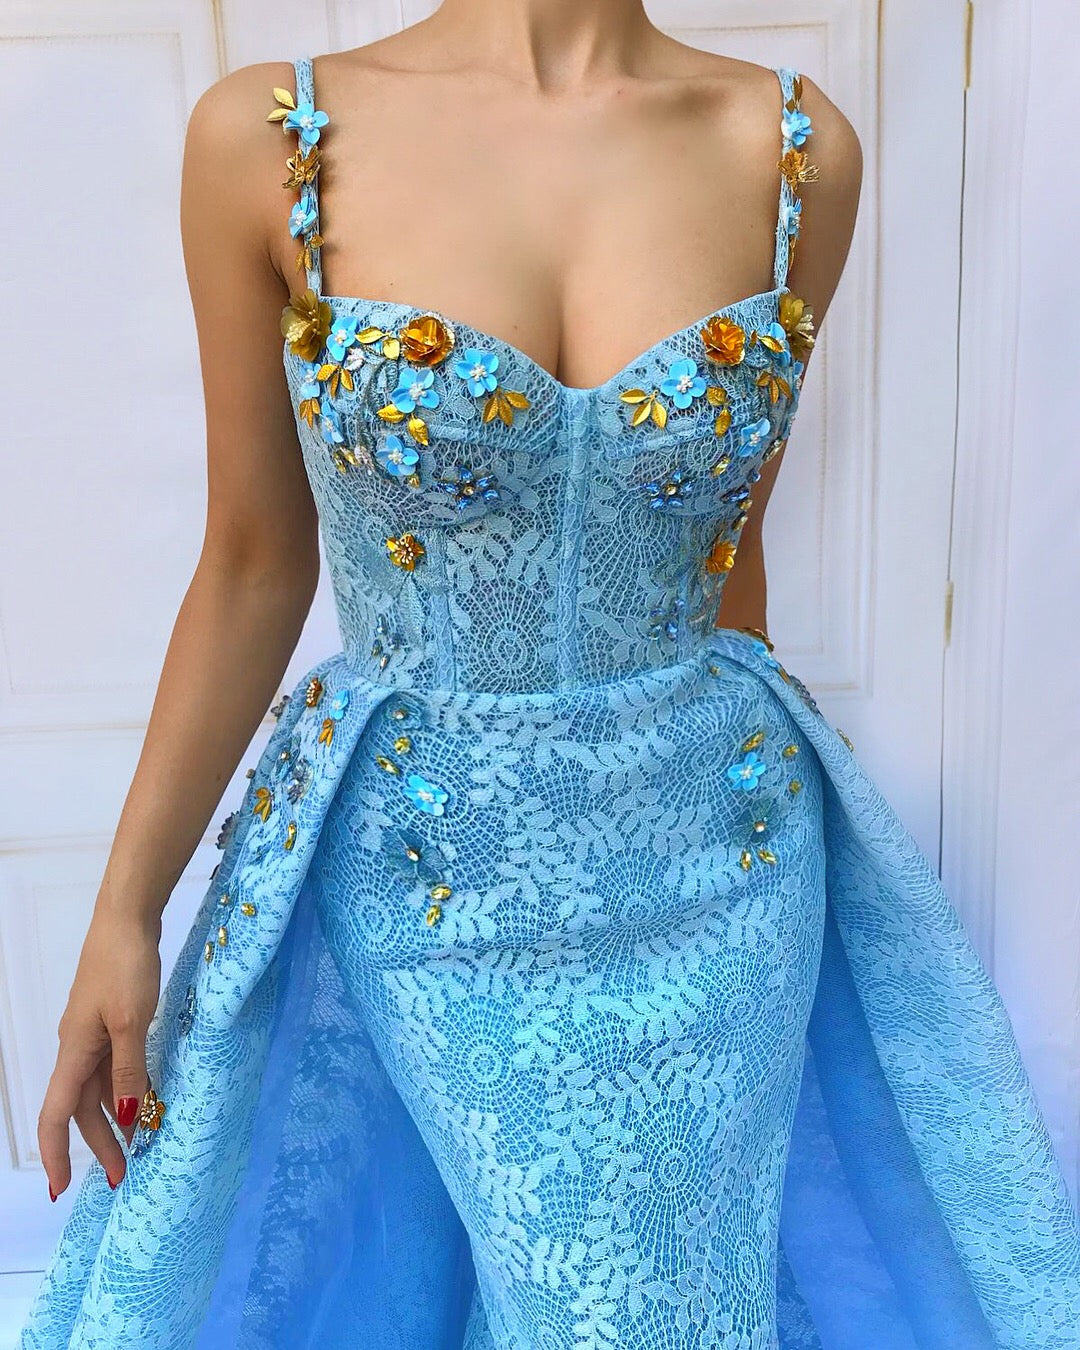 Blue overskirt dress with spaghetti straps and embroidery